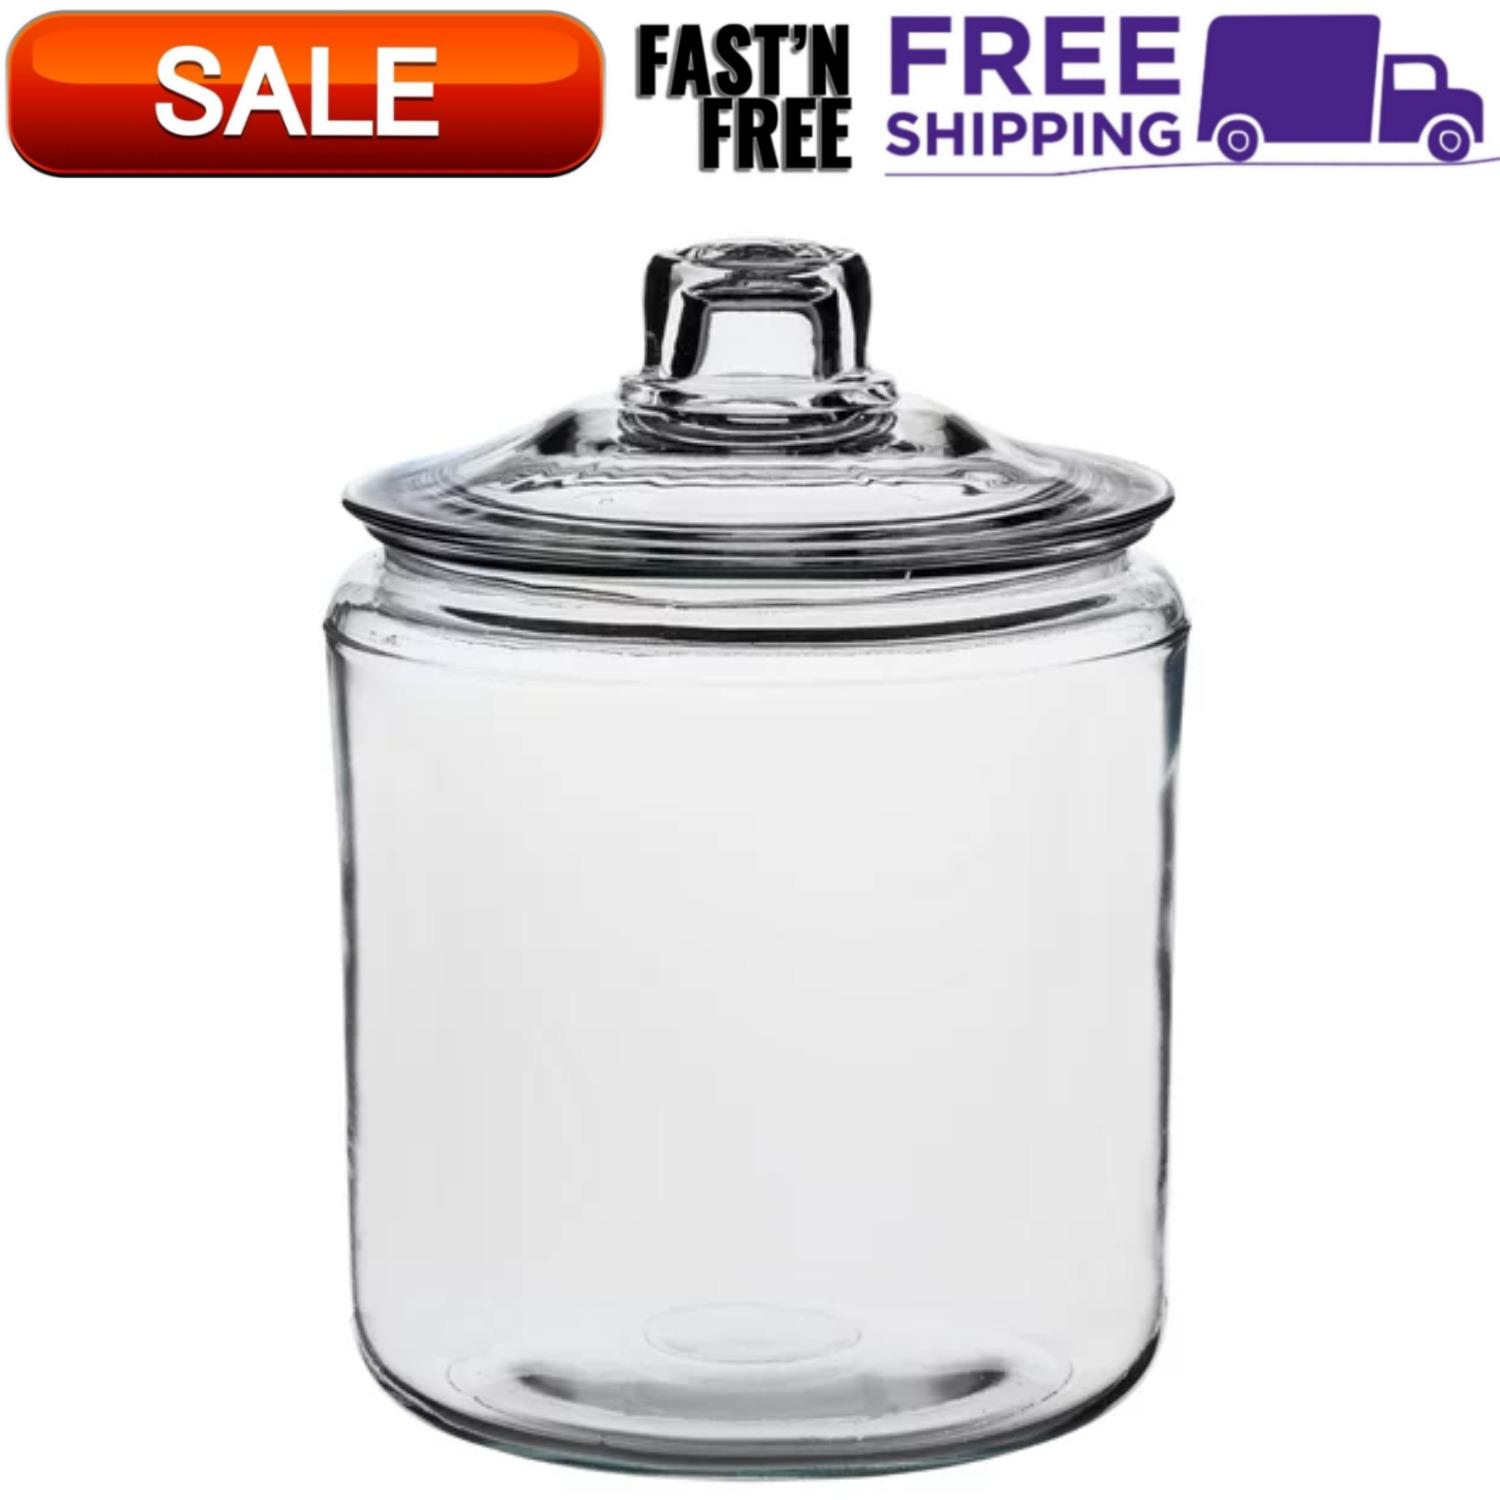 Anchor Hocking Heritage Hill Clear Glass Jar with Lid Kitchen Storage, 1 Gallon